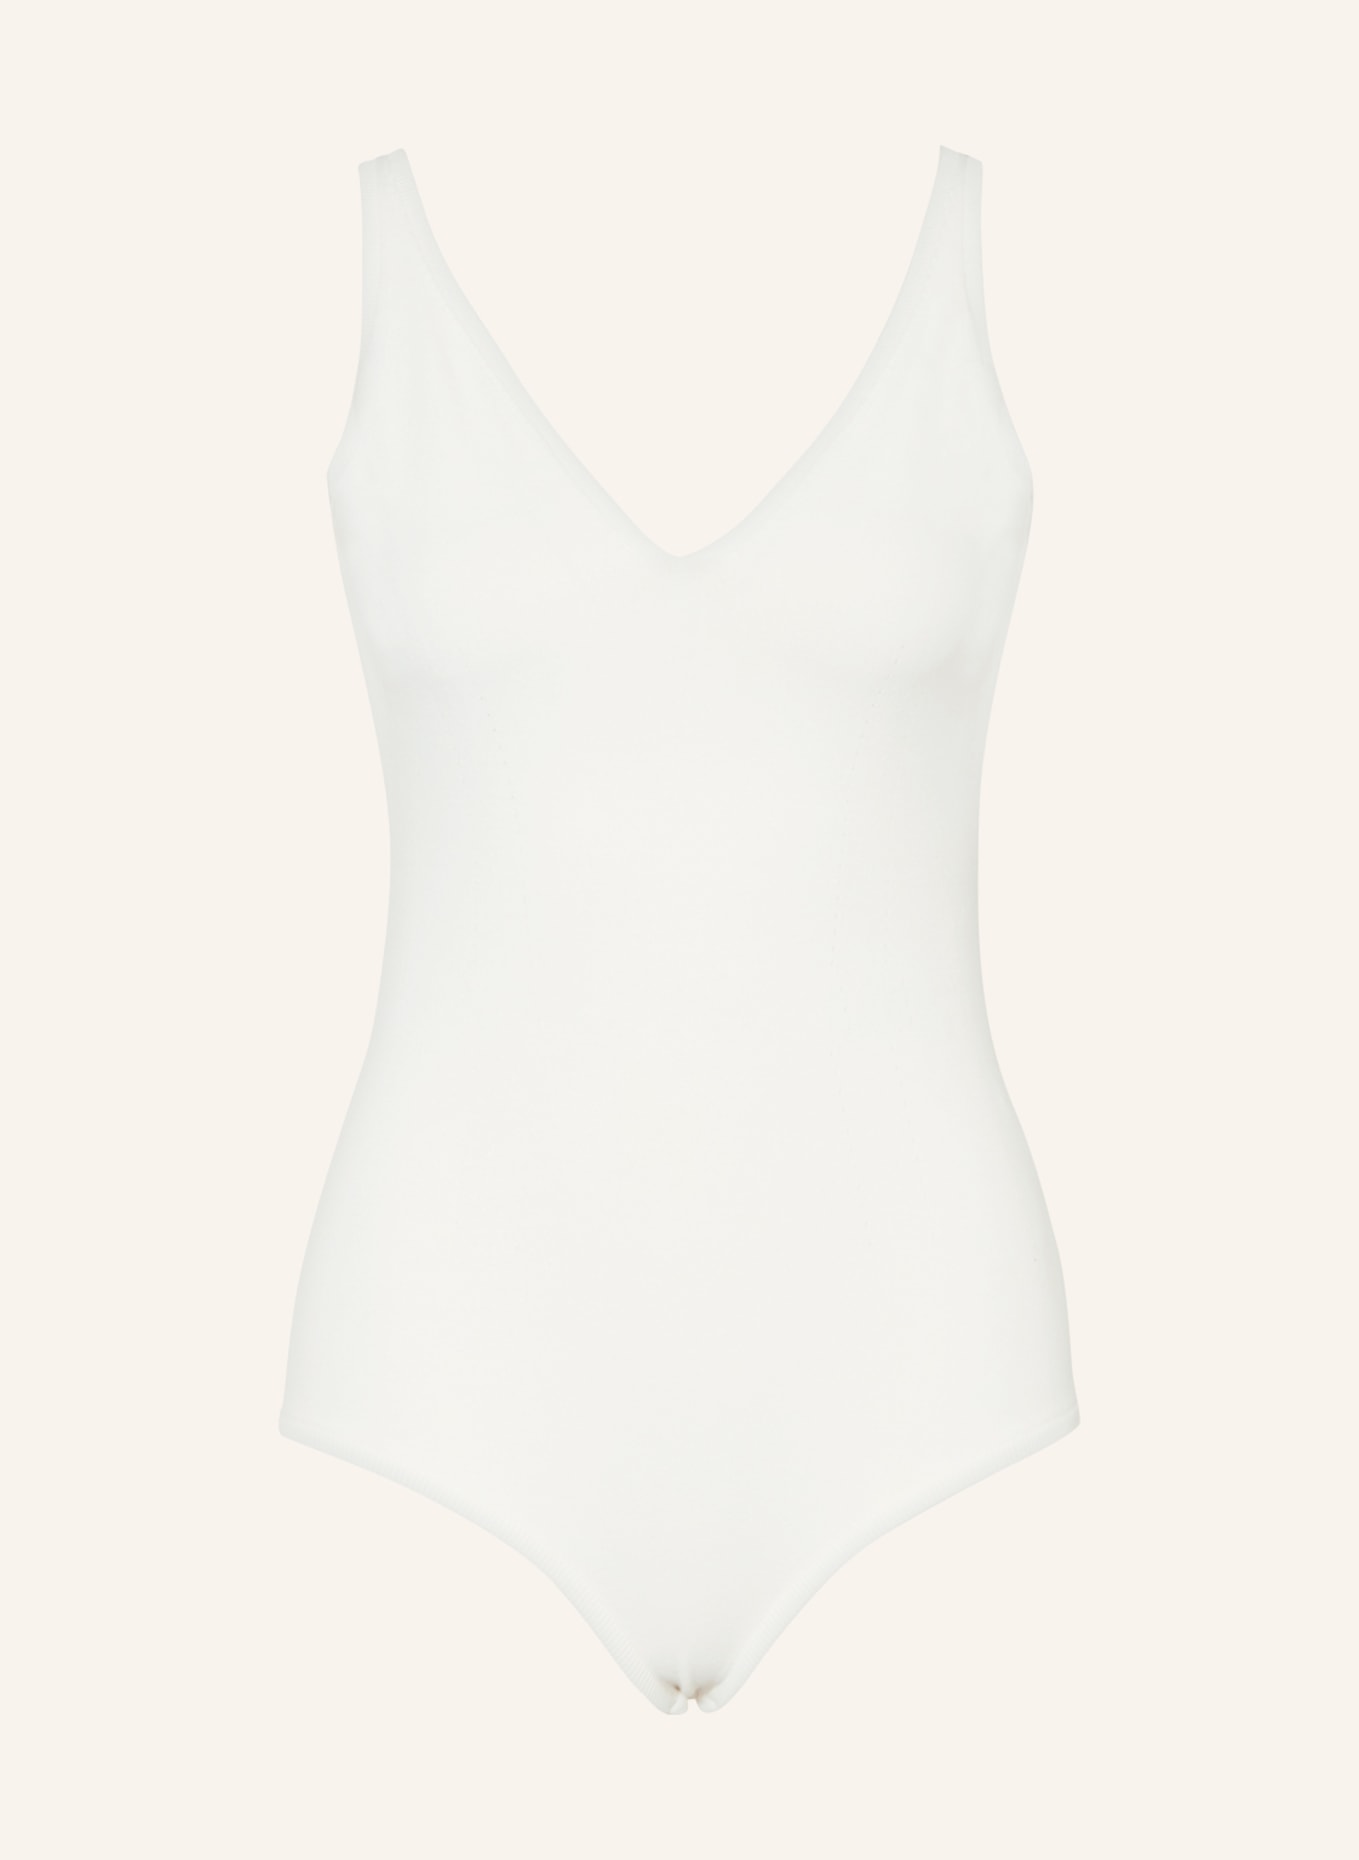 Alexander McQUEEN Knit body, Color: WHITE (Image 1)